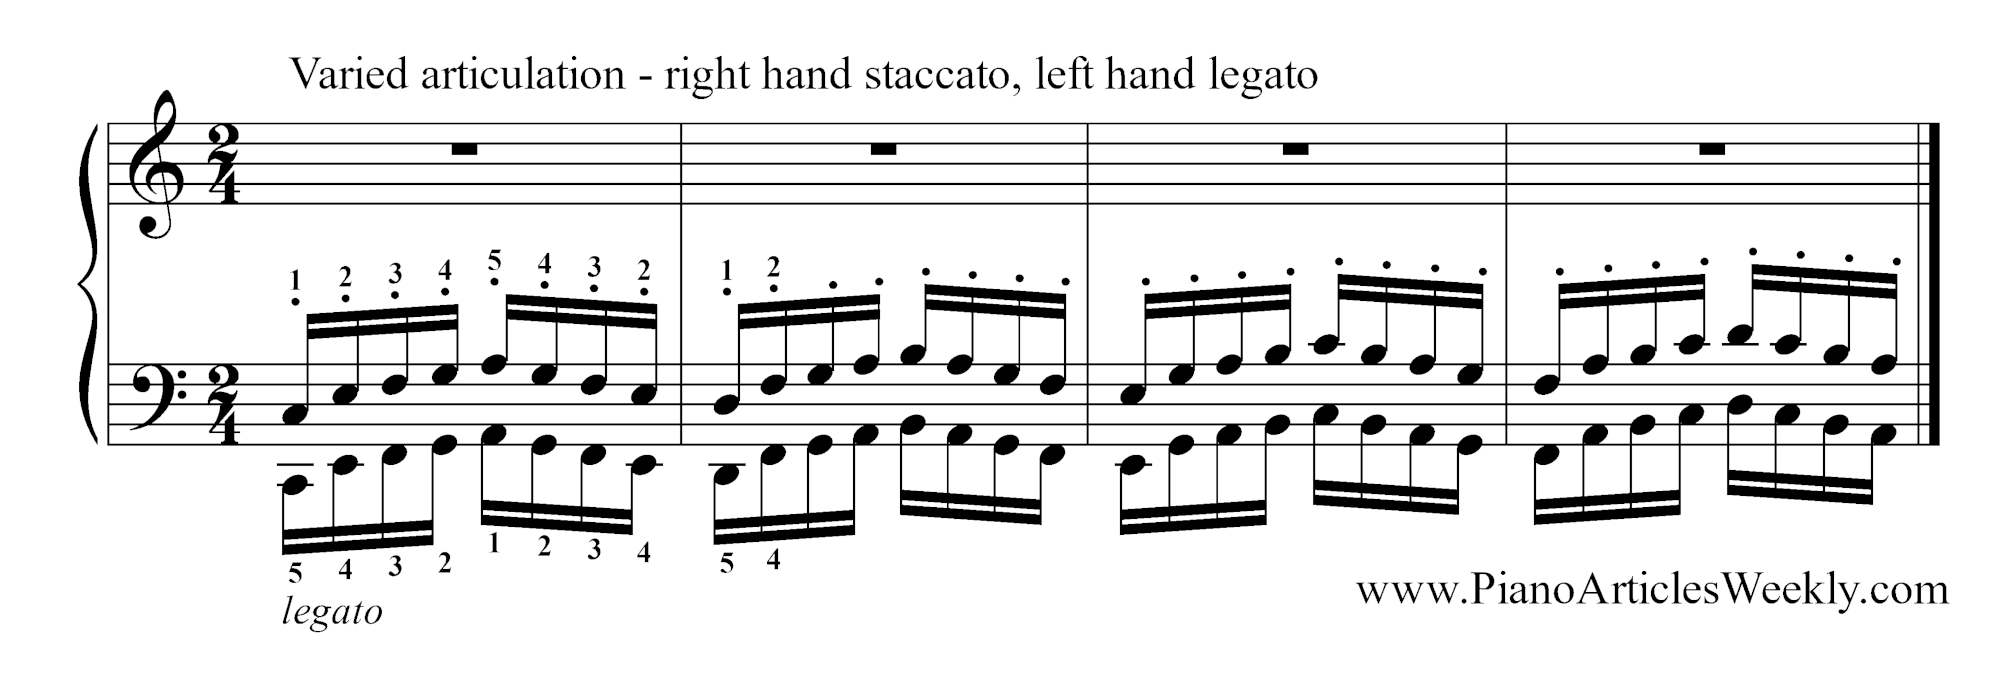 Hanon-Exercise-varied-articulation-left-hand-legato-right-hand-staccato